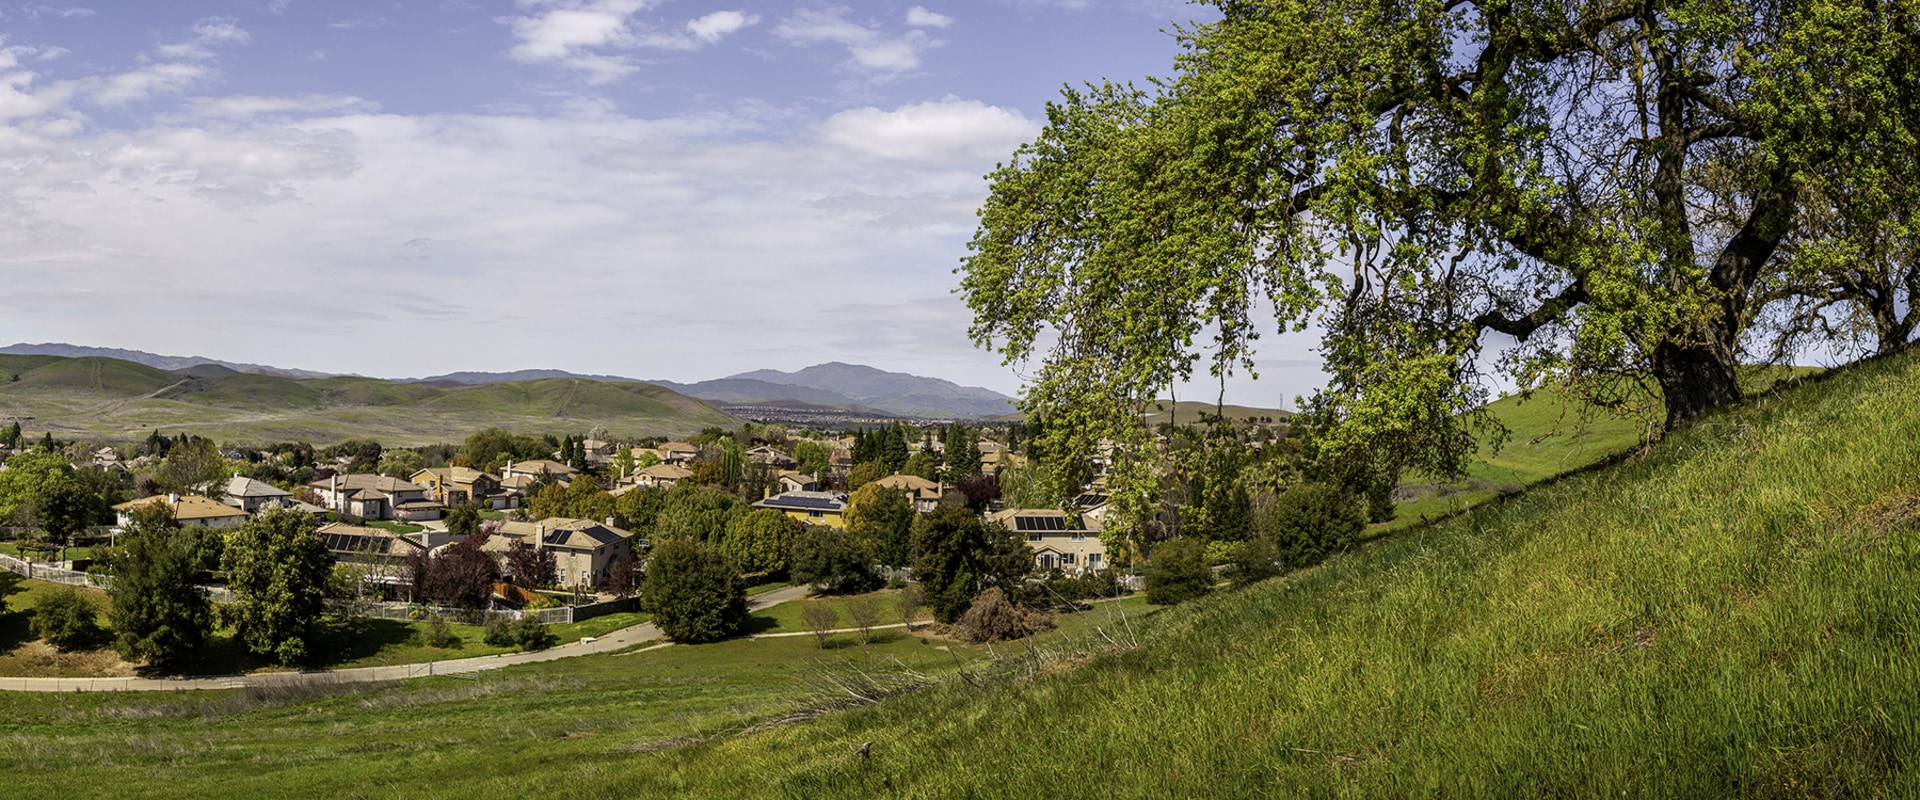 Photography at Historical Sites in San Ramon, California